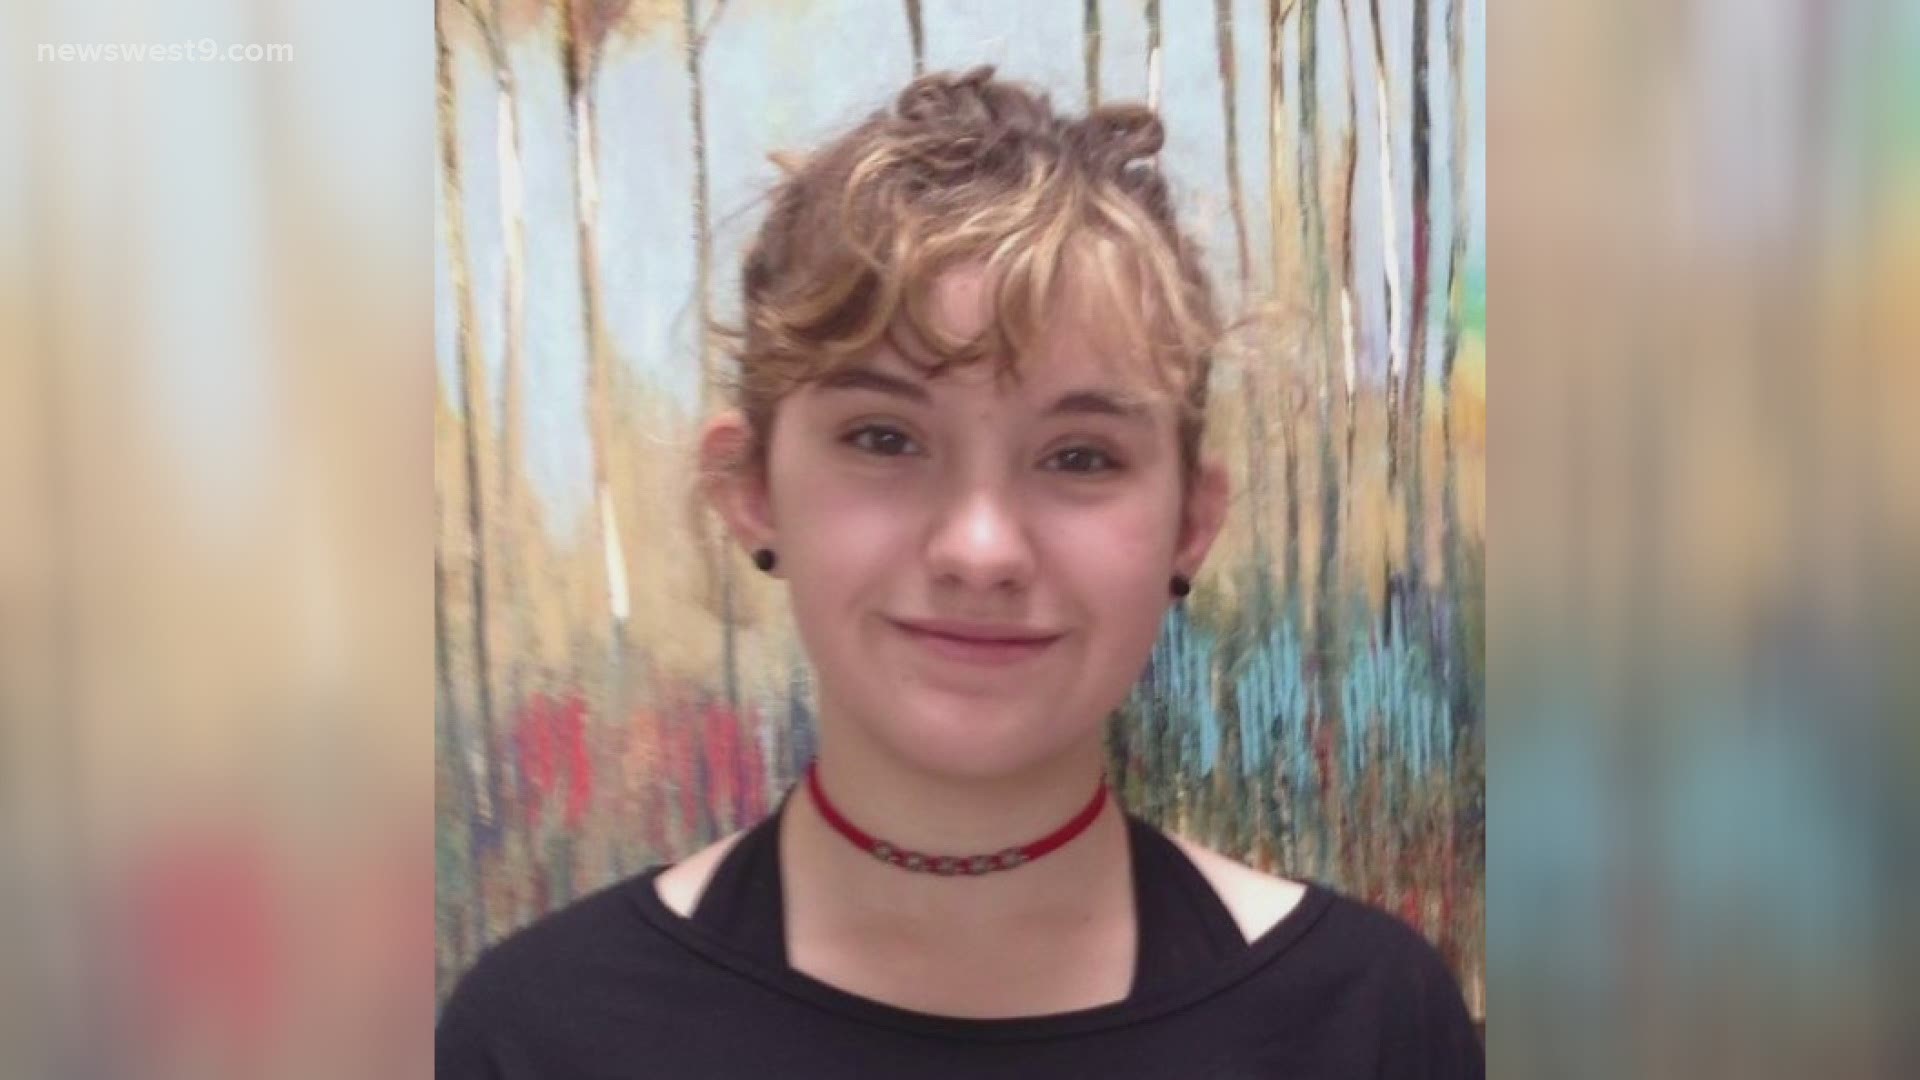 If you have any information on Marit Kercheval-Clifford, 14, you are asked to call OPD or CrimeStoppers.